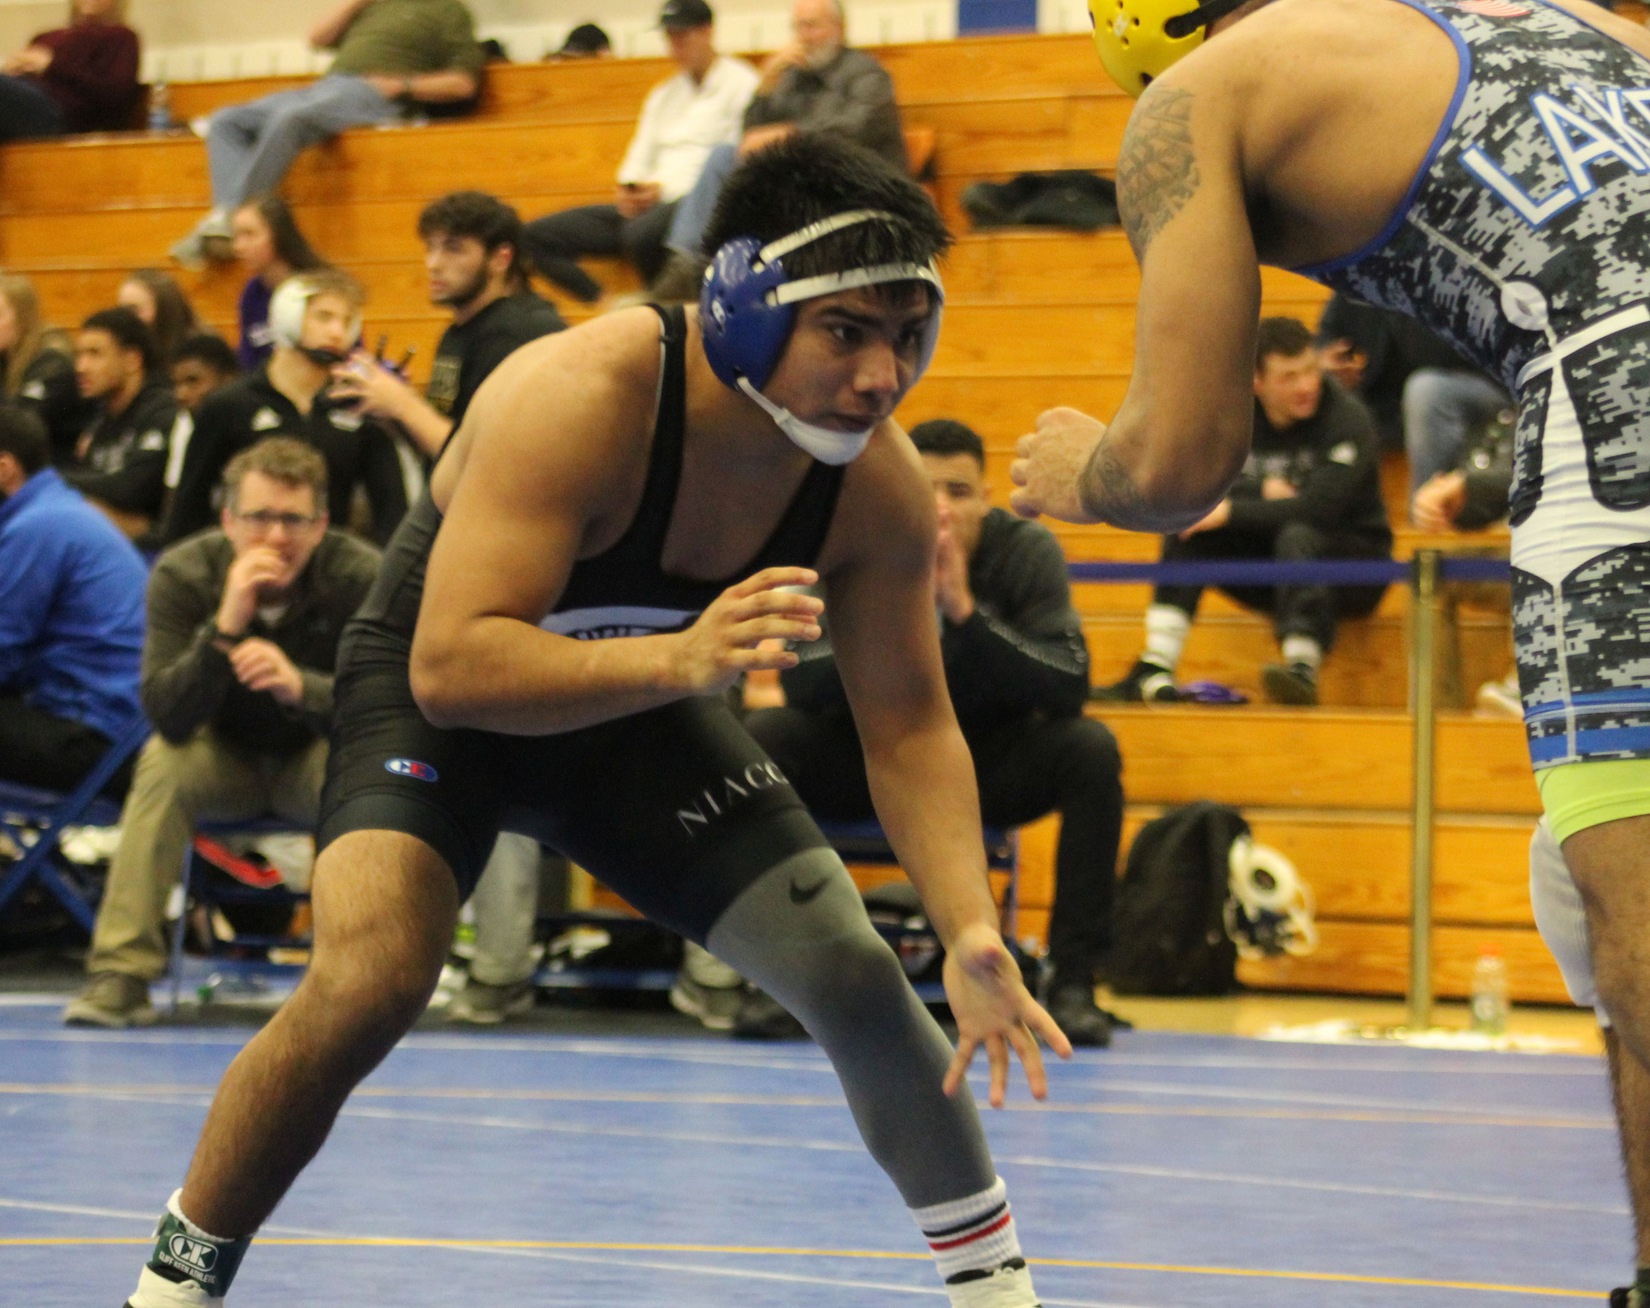 NIACC's 149-pounder Tony Mendoza is ranked second heading into the March 6-7 national tournament in Council Bluffs.